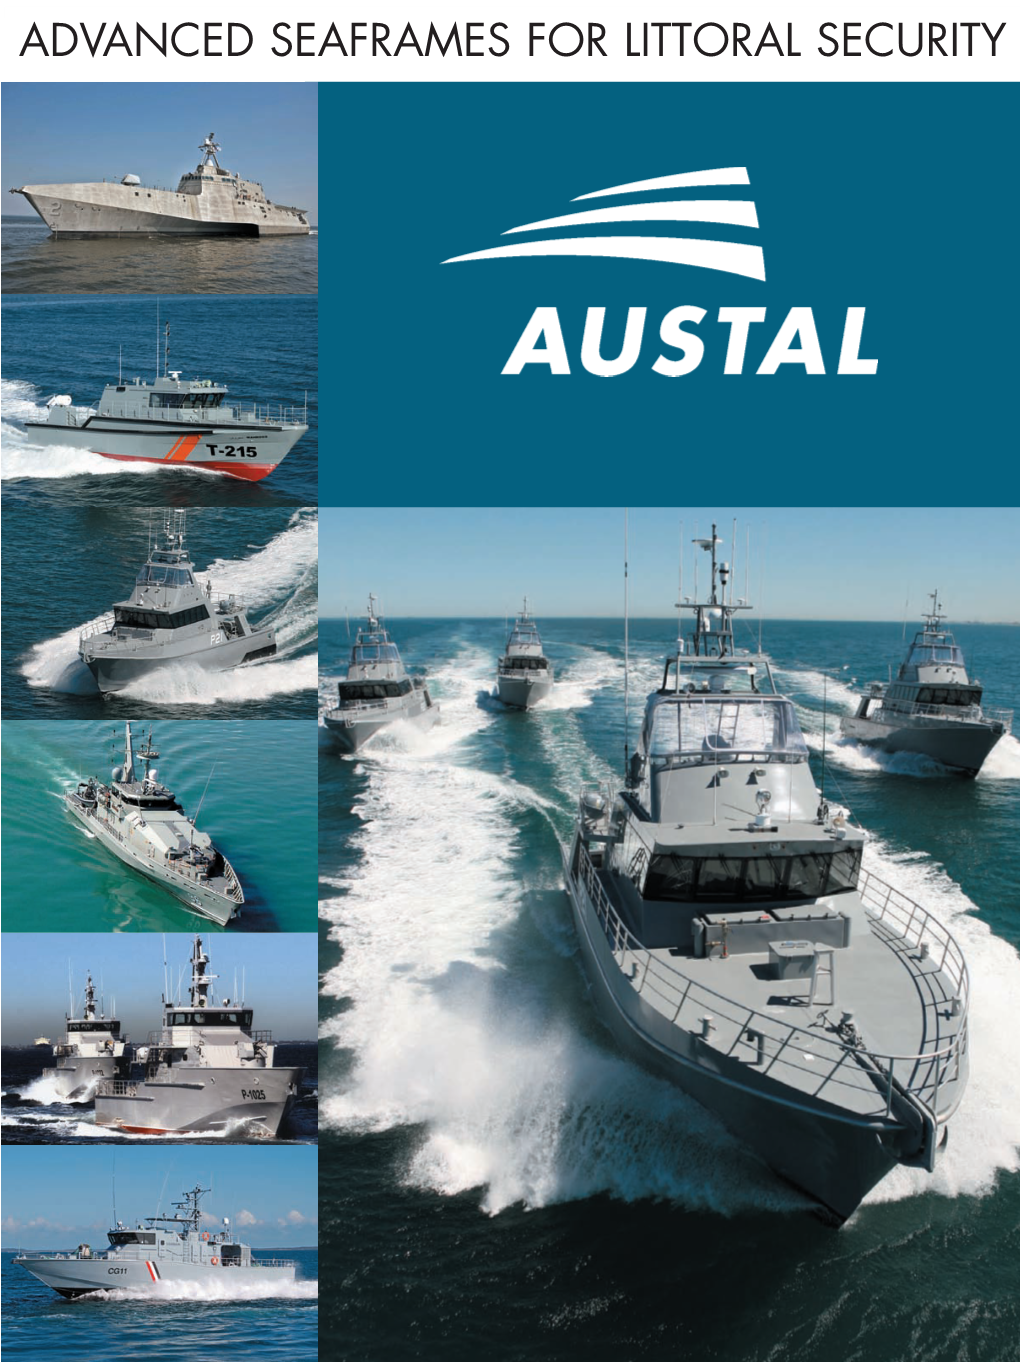 ADVANCED SEAFRAMES for LITTORAL SECURITY Austal-Final-2.Ps 15/12/09 9:53 Am Page 2